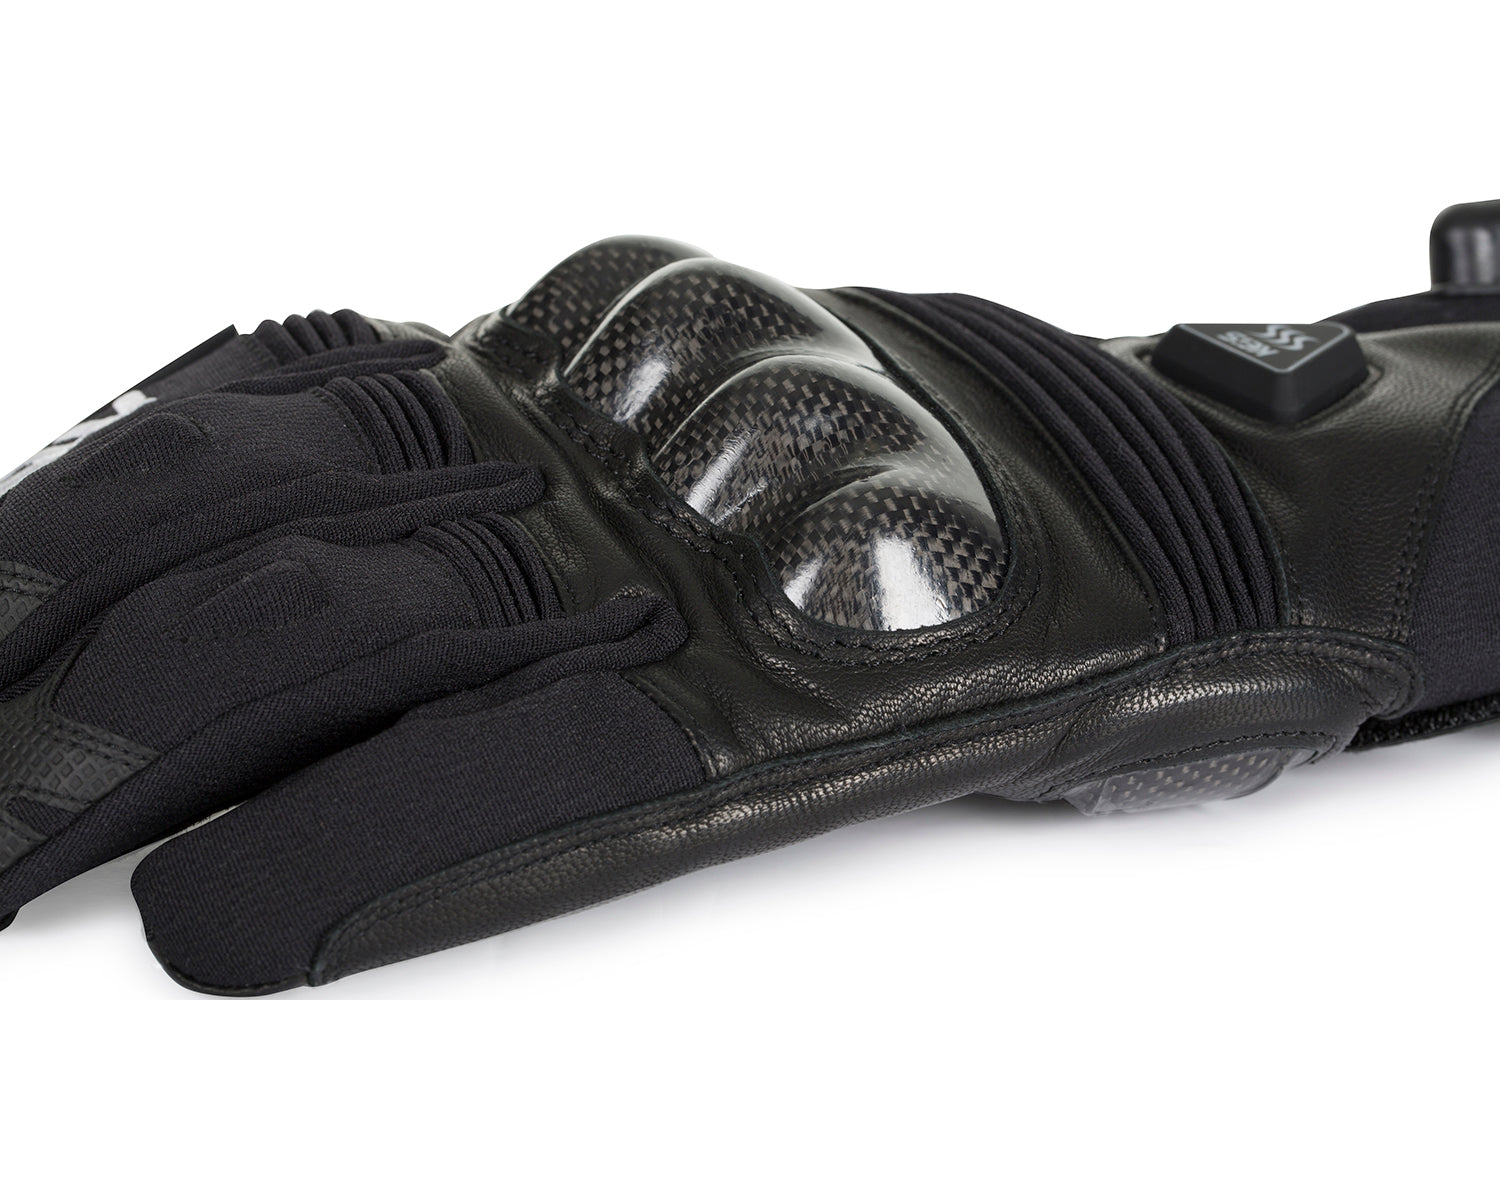 Heated Motorcycle Gloves - G502 Sport - Limited sizes